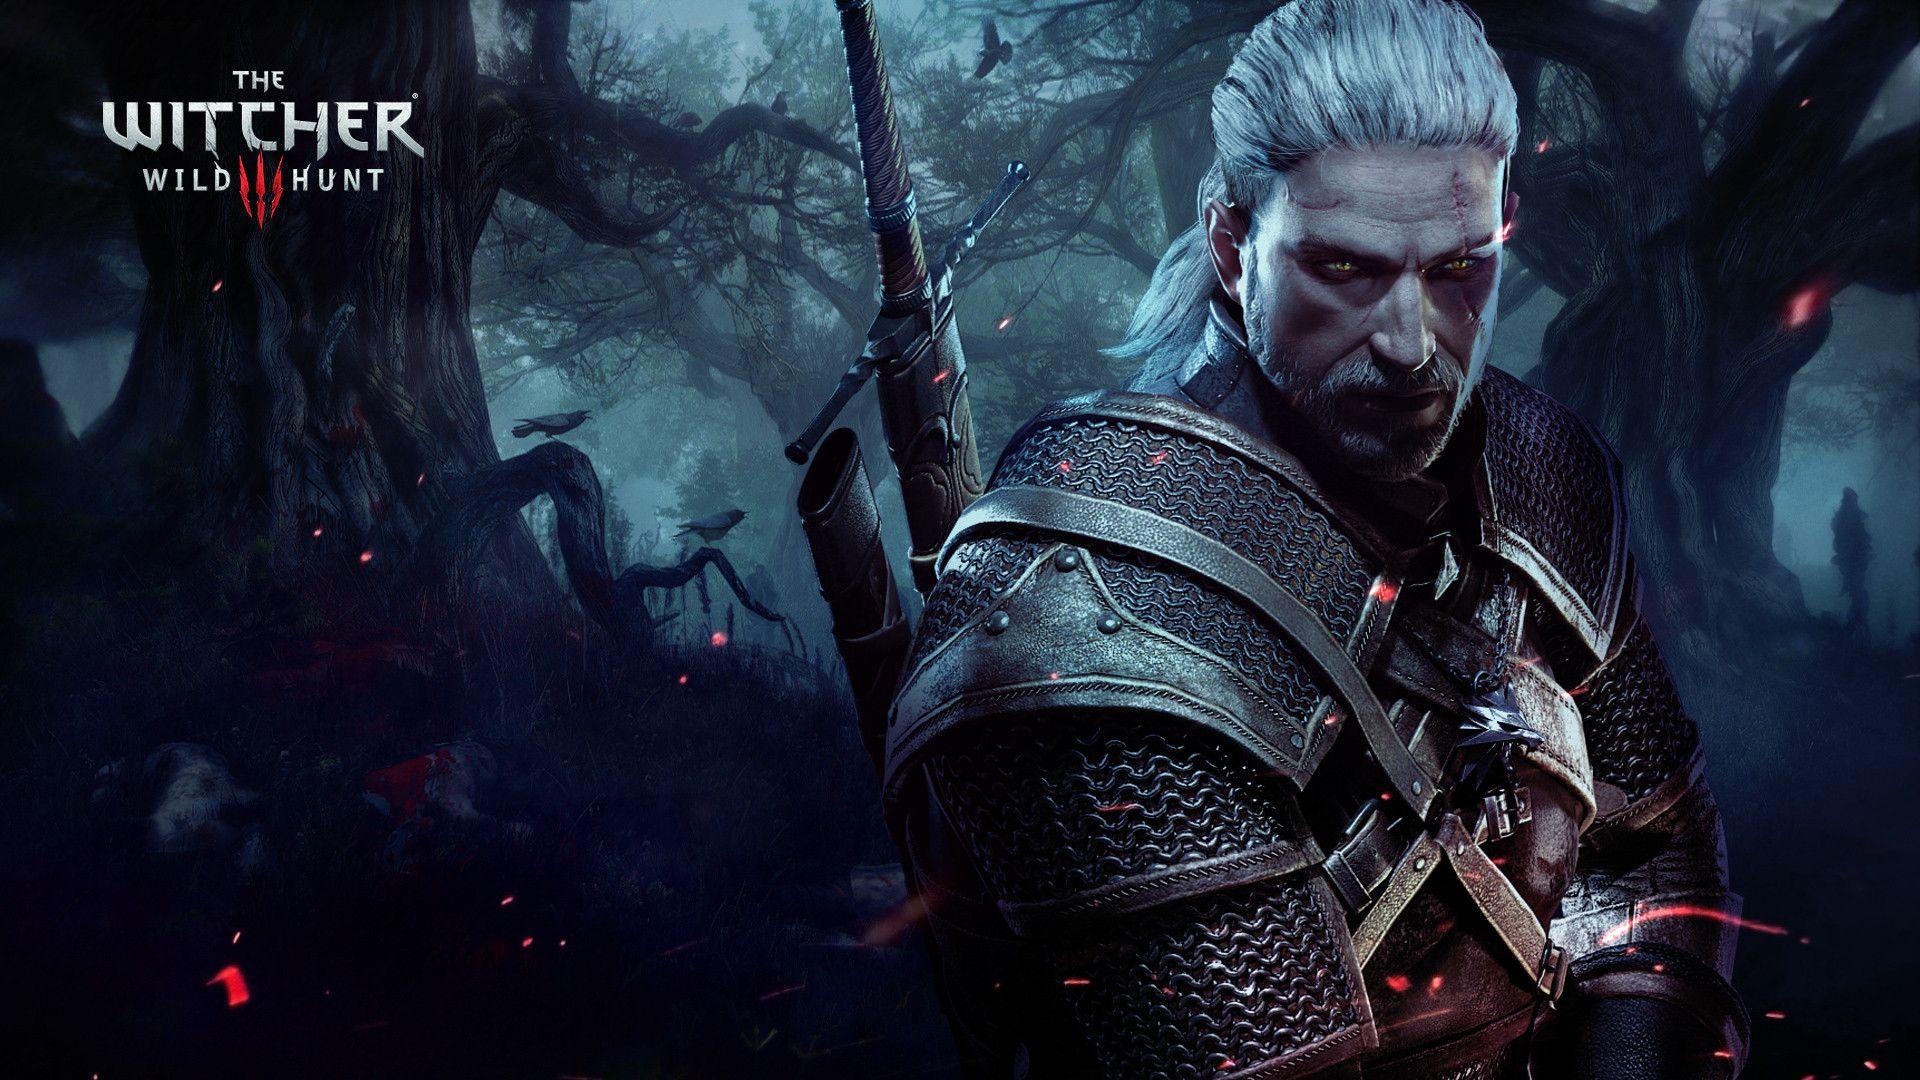 The Witcher Wild Hunt wallpapers